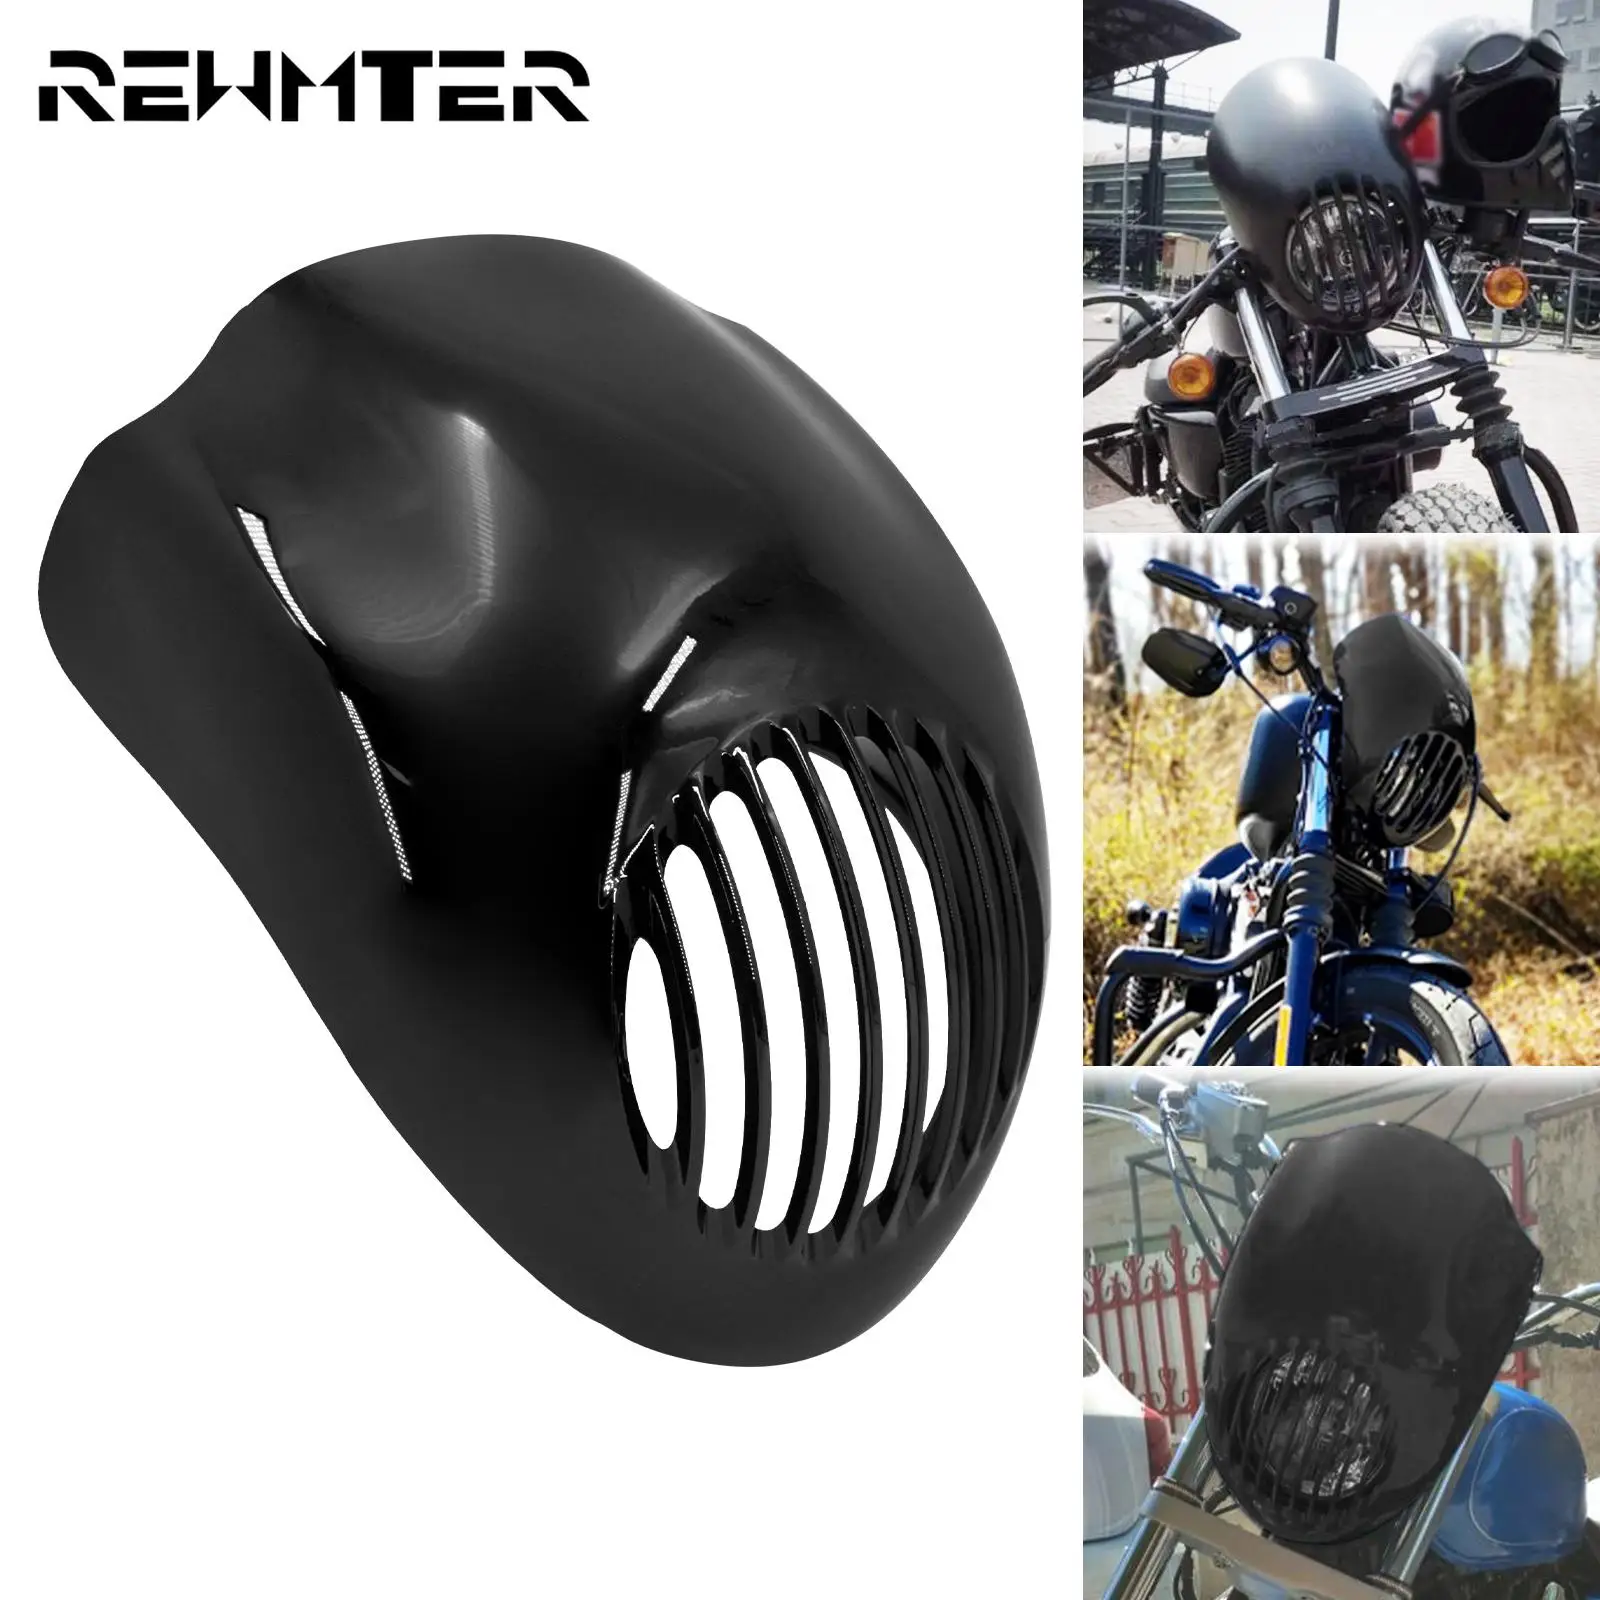 Motorcycle Grill Headlight Fairing Head light Mask Front Fork Mount For Harley Dyna Low Rider Super Glide Sportster XL 883 1200